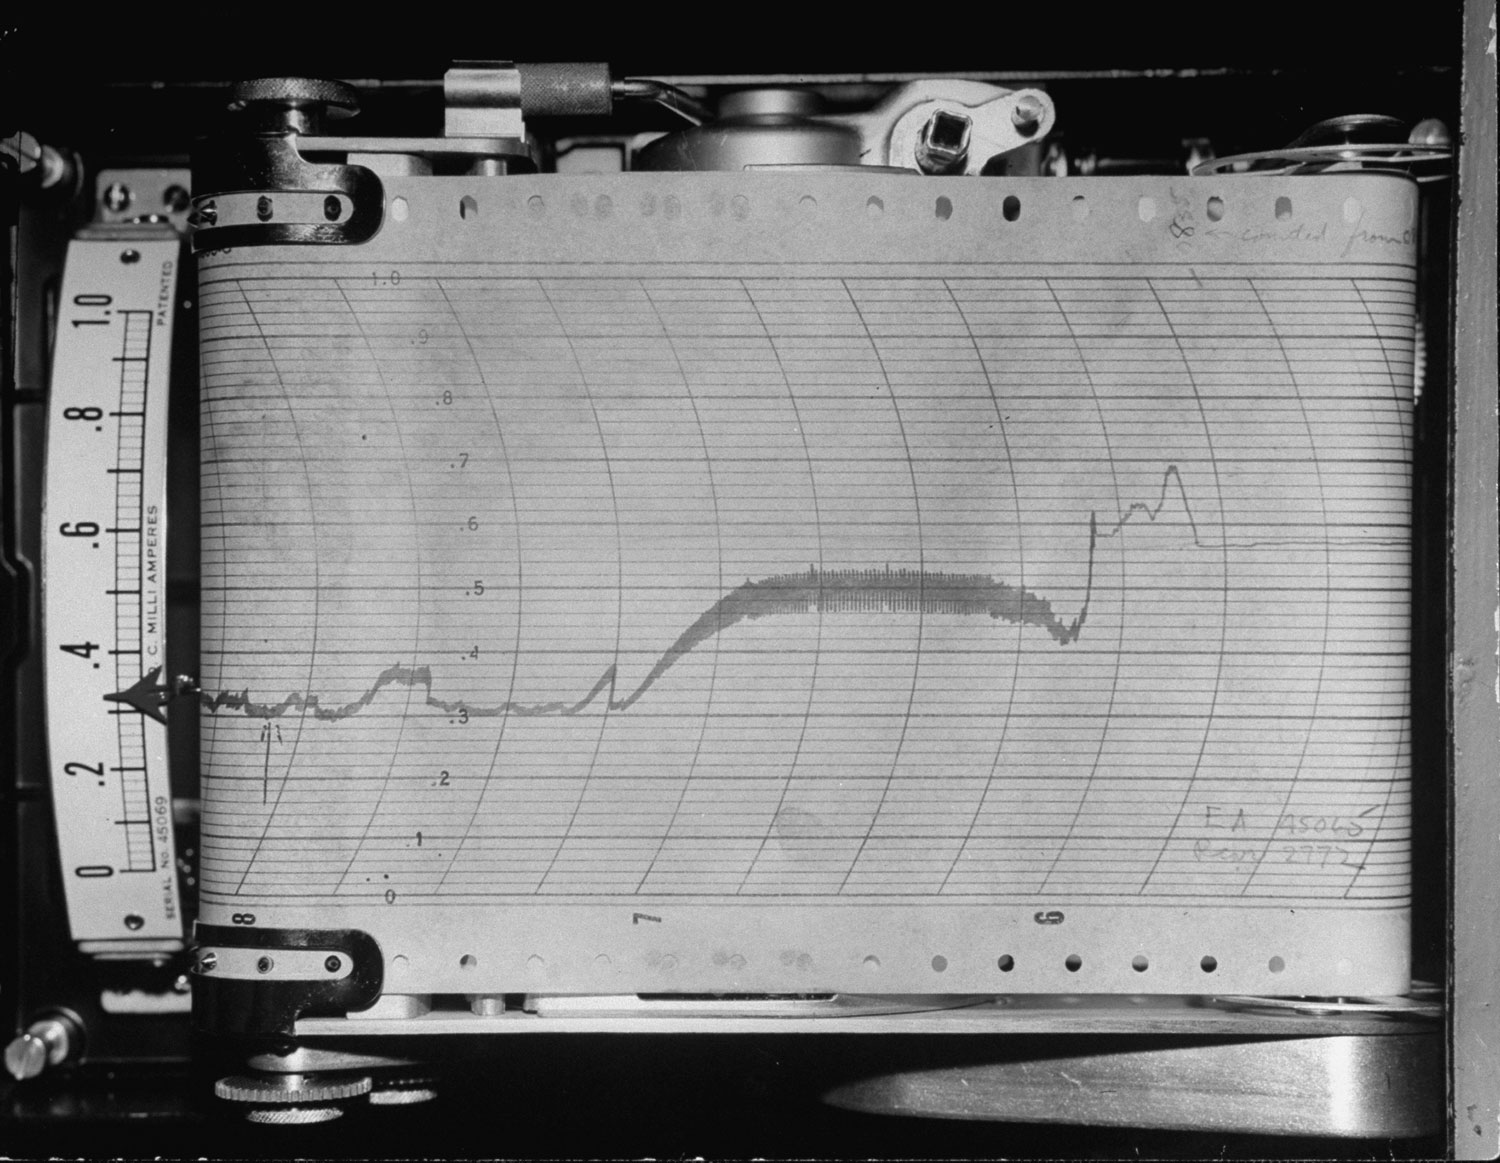 A machine graphing the radioactivity broadcast by one of the July 1946 nuclear explosions in the South Pacific.